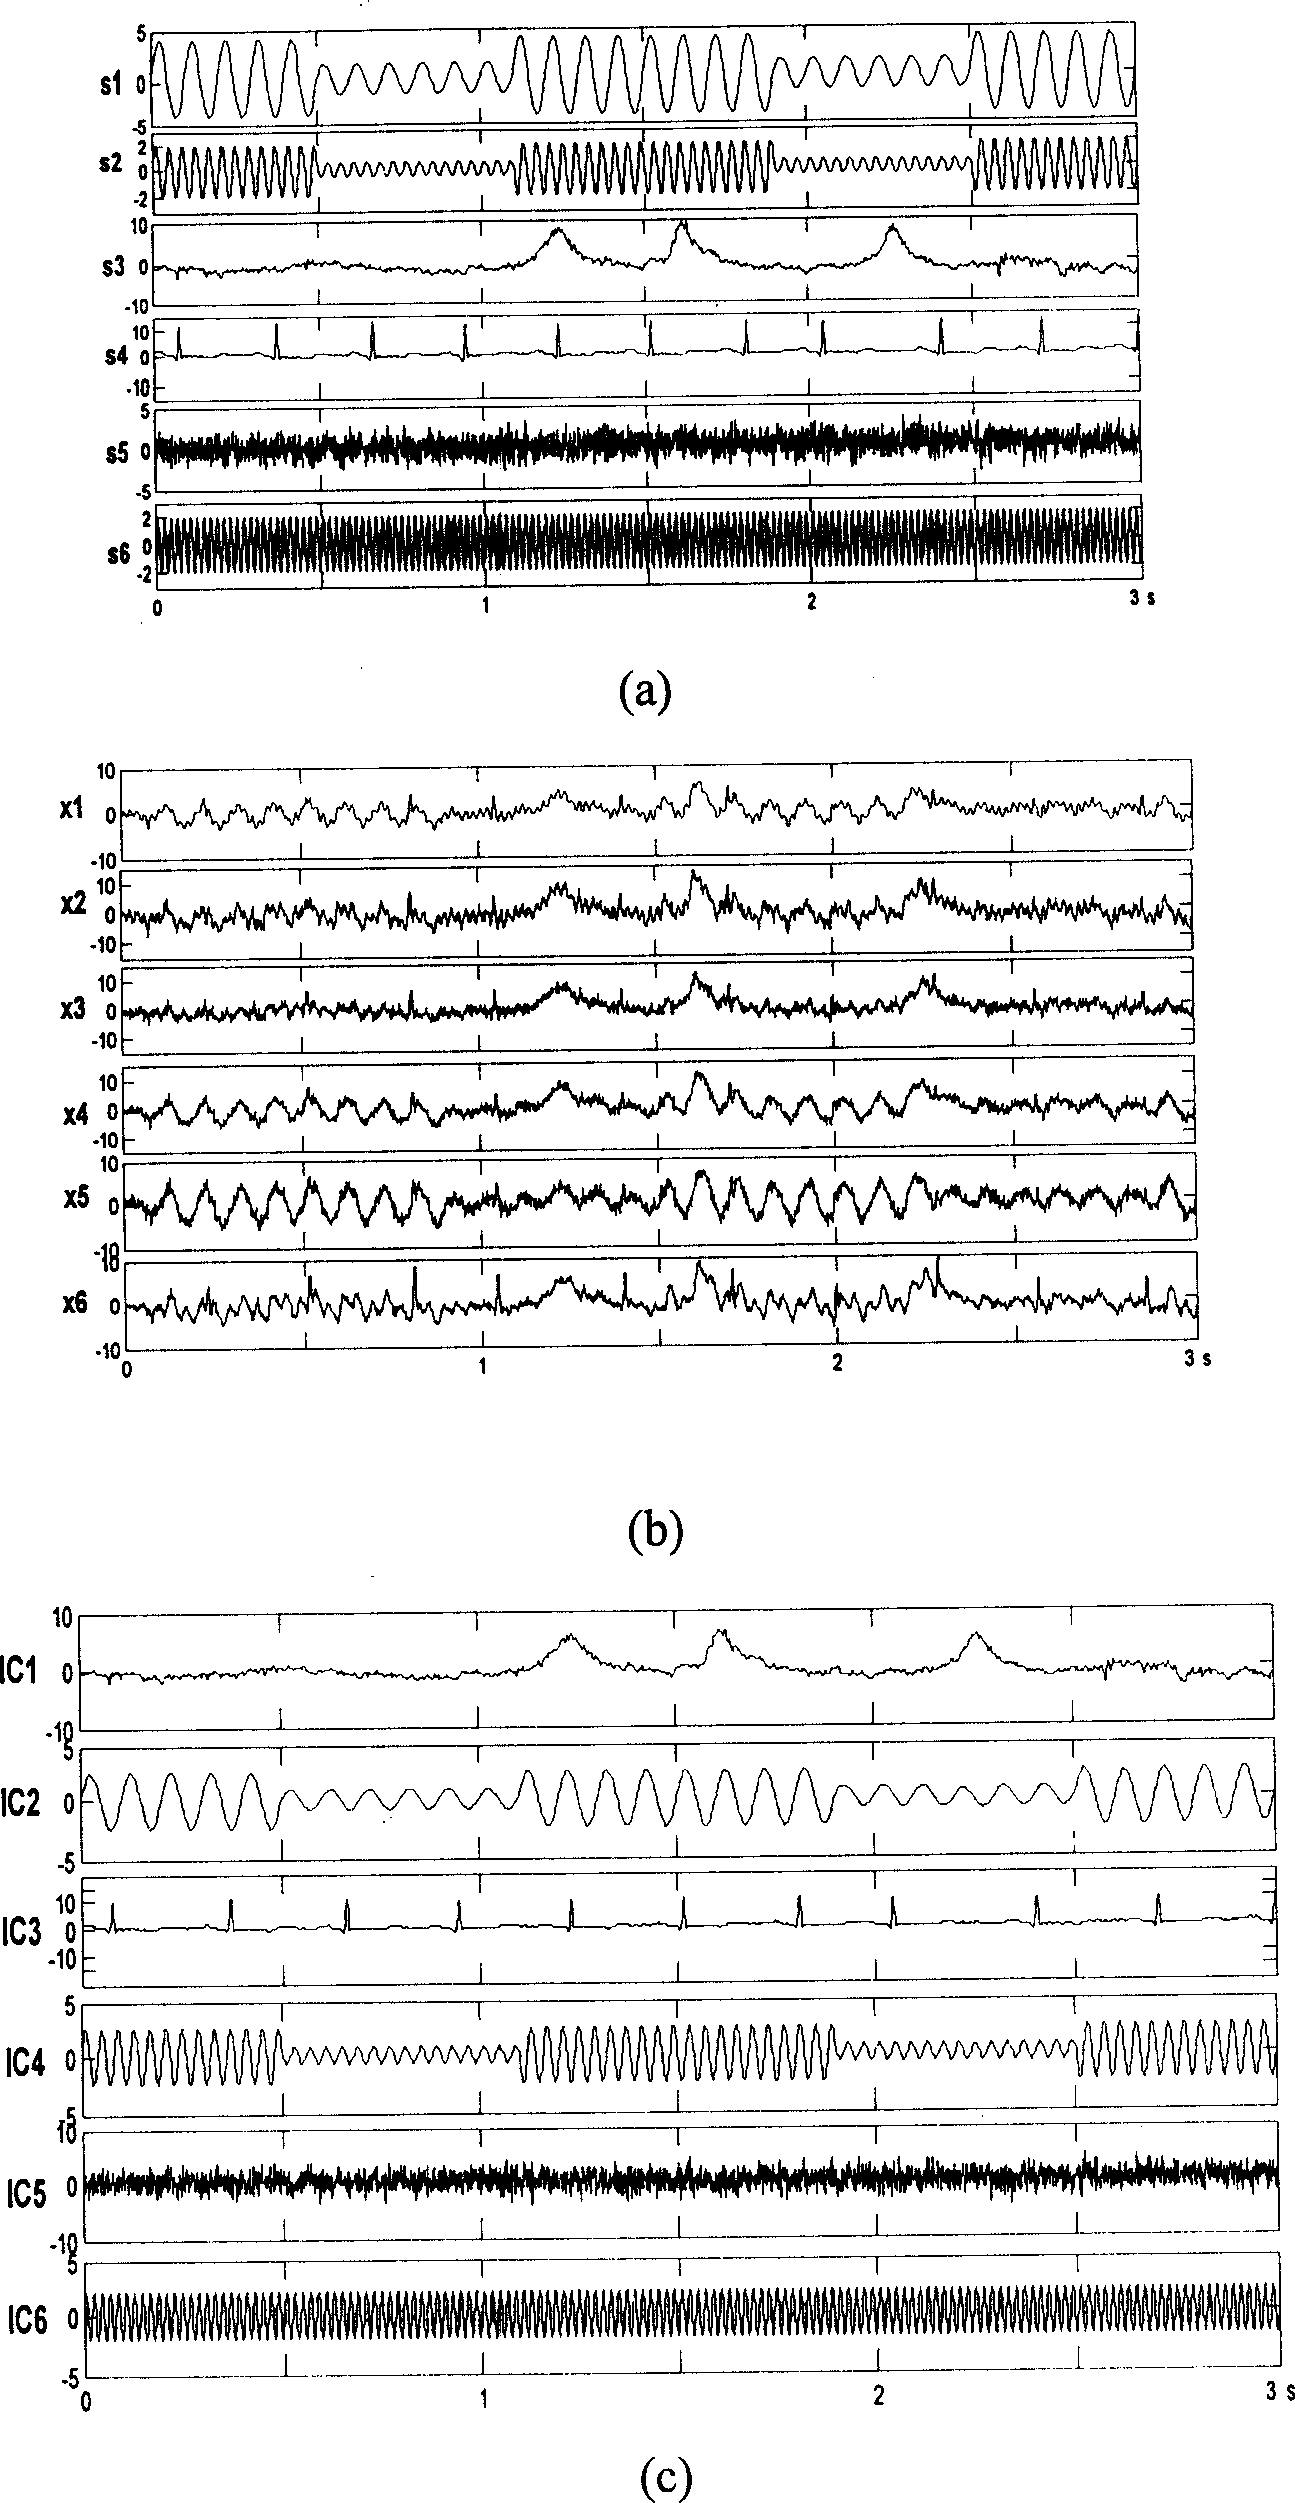 A method for automatically detecting and removing artifacts from EEG signal